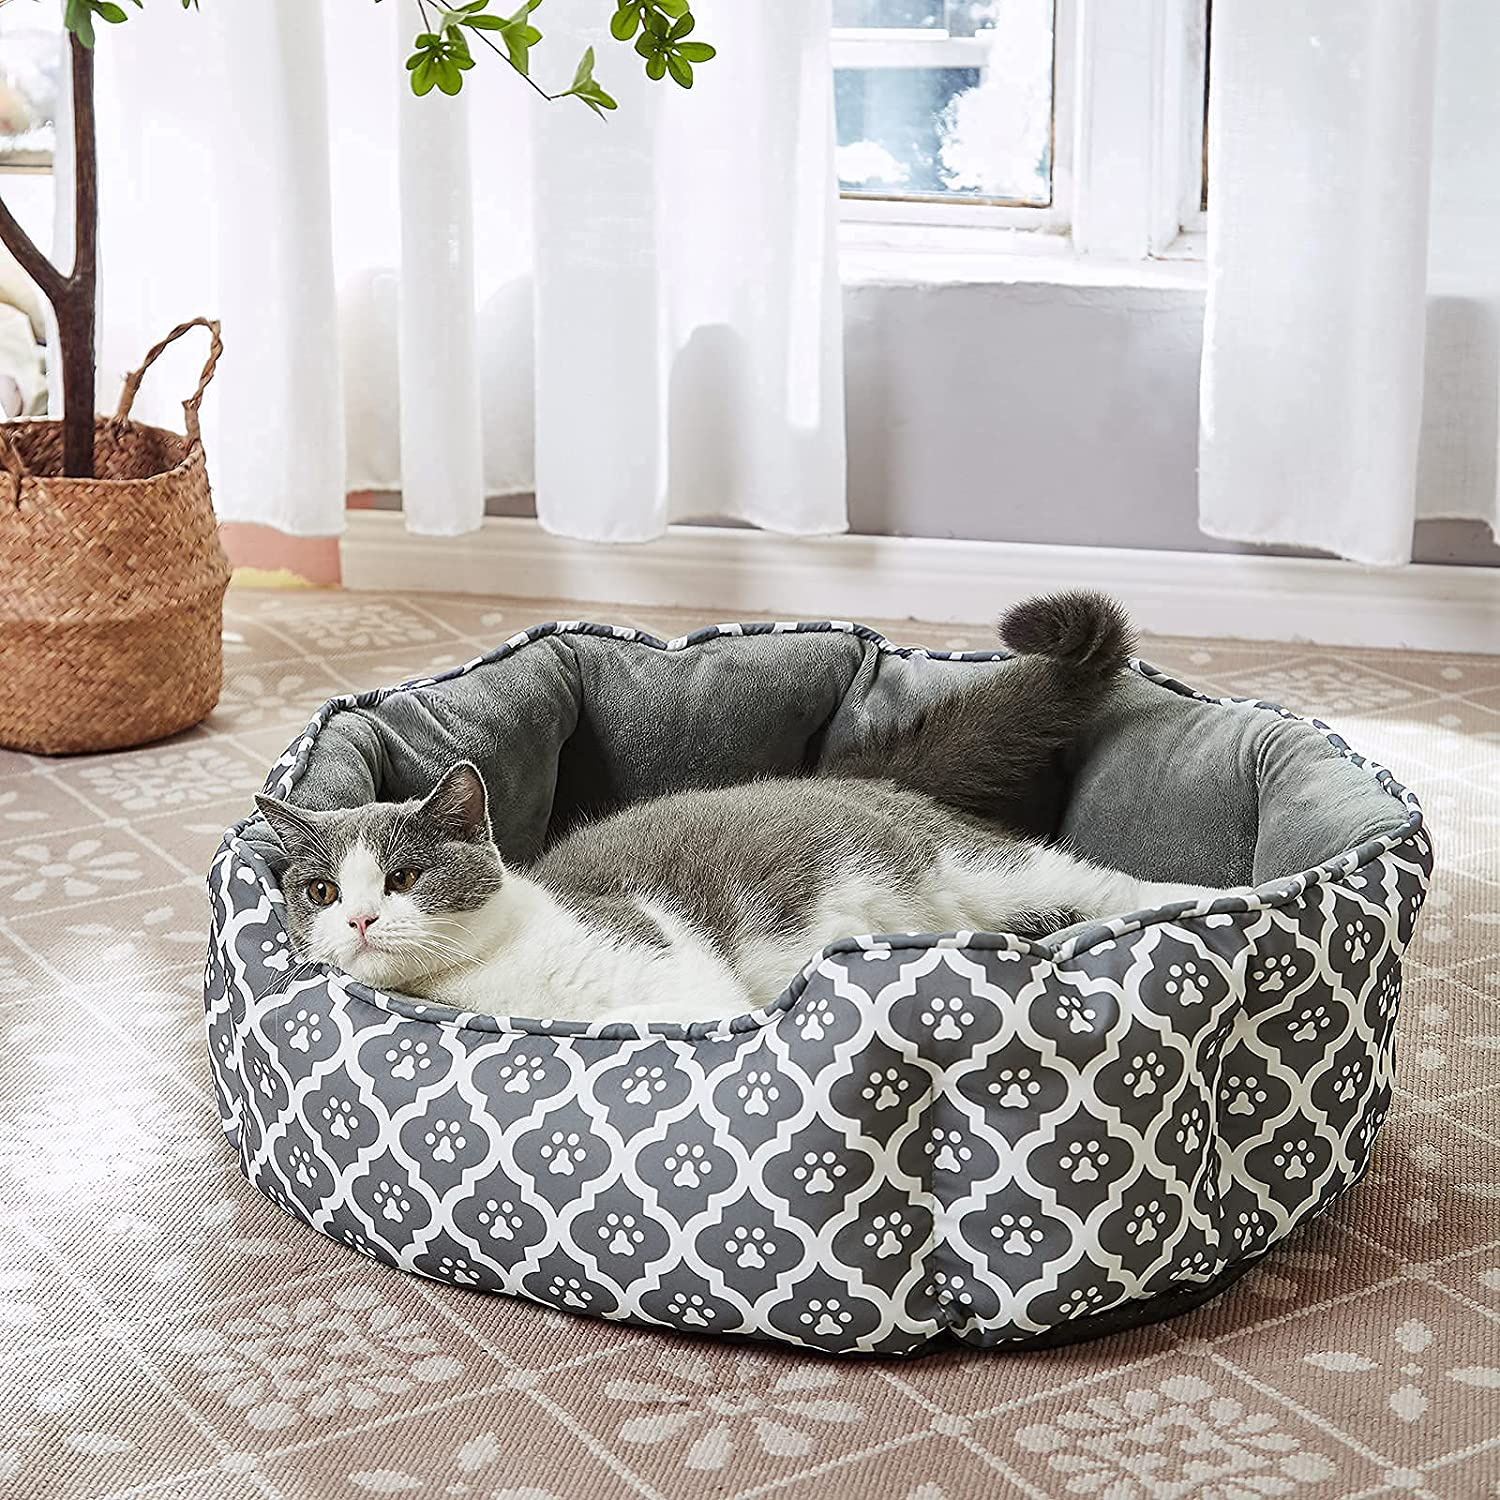 LUCKITTY Cat Bed,Soft Velvet & Waterproof Oxford Two-Sided Cushion, Easy Washable,Oval Geometric Pet Beds for Indoor Cats or Small Animas